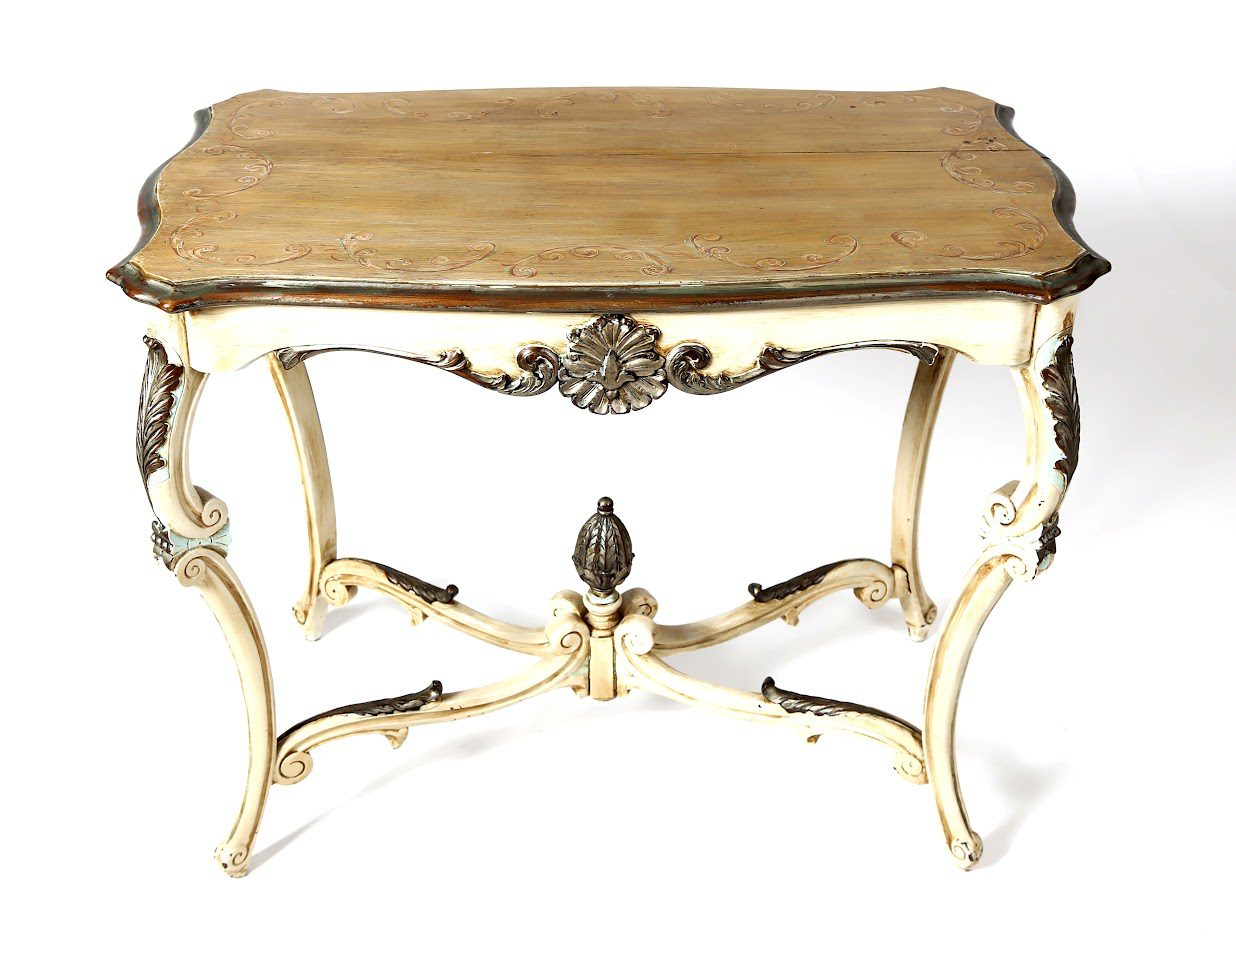 A table with a wooden top and white painted legs.